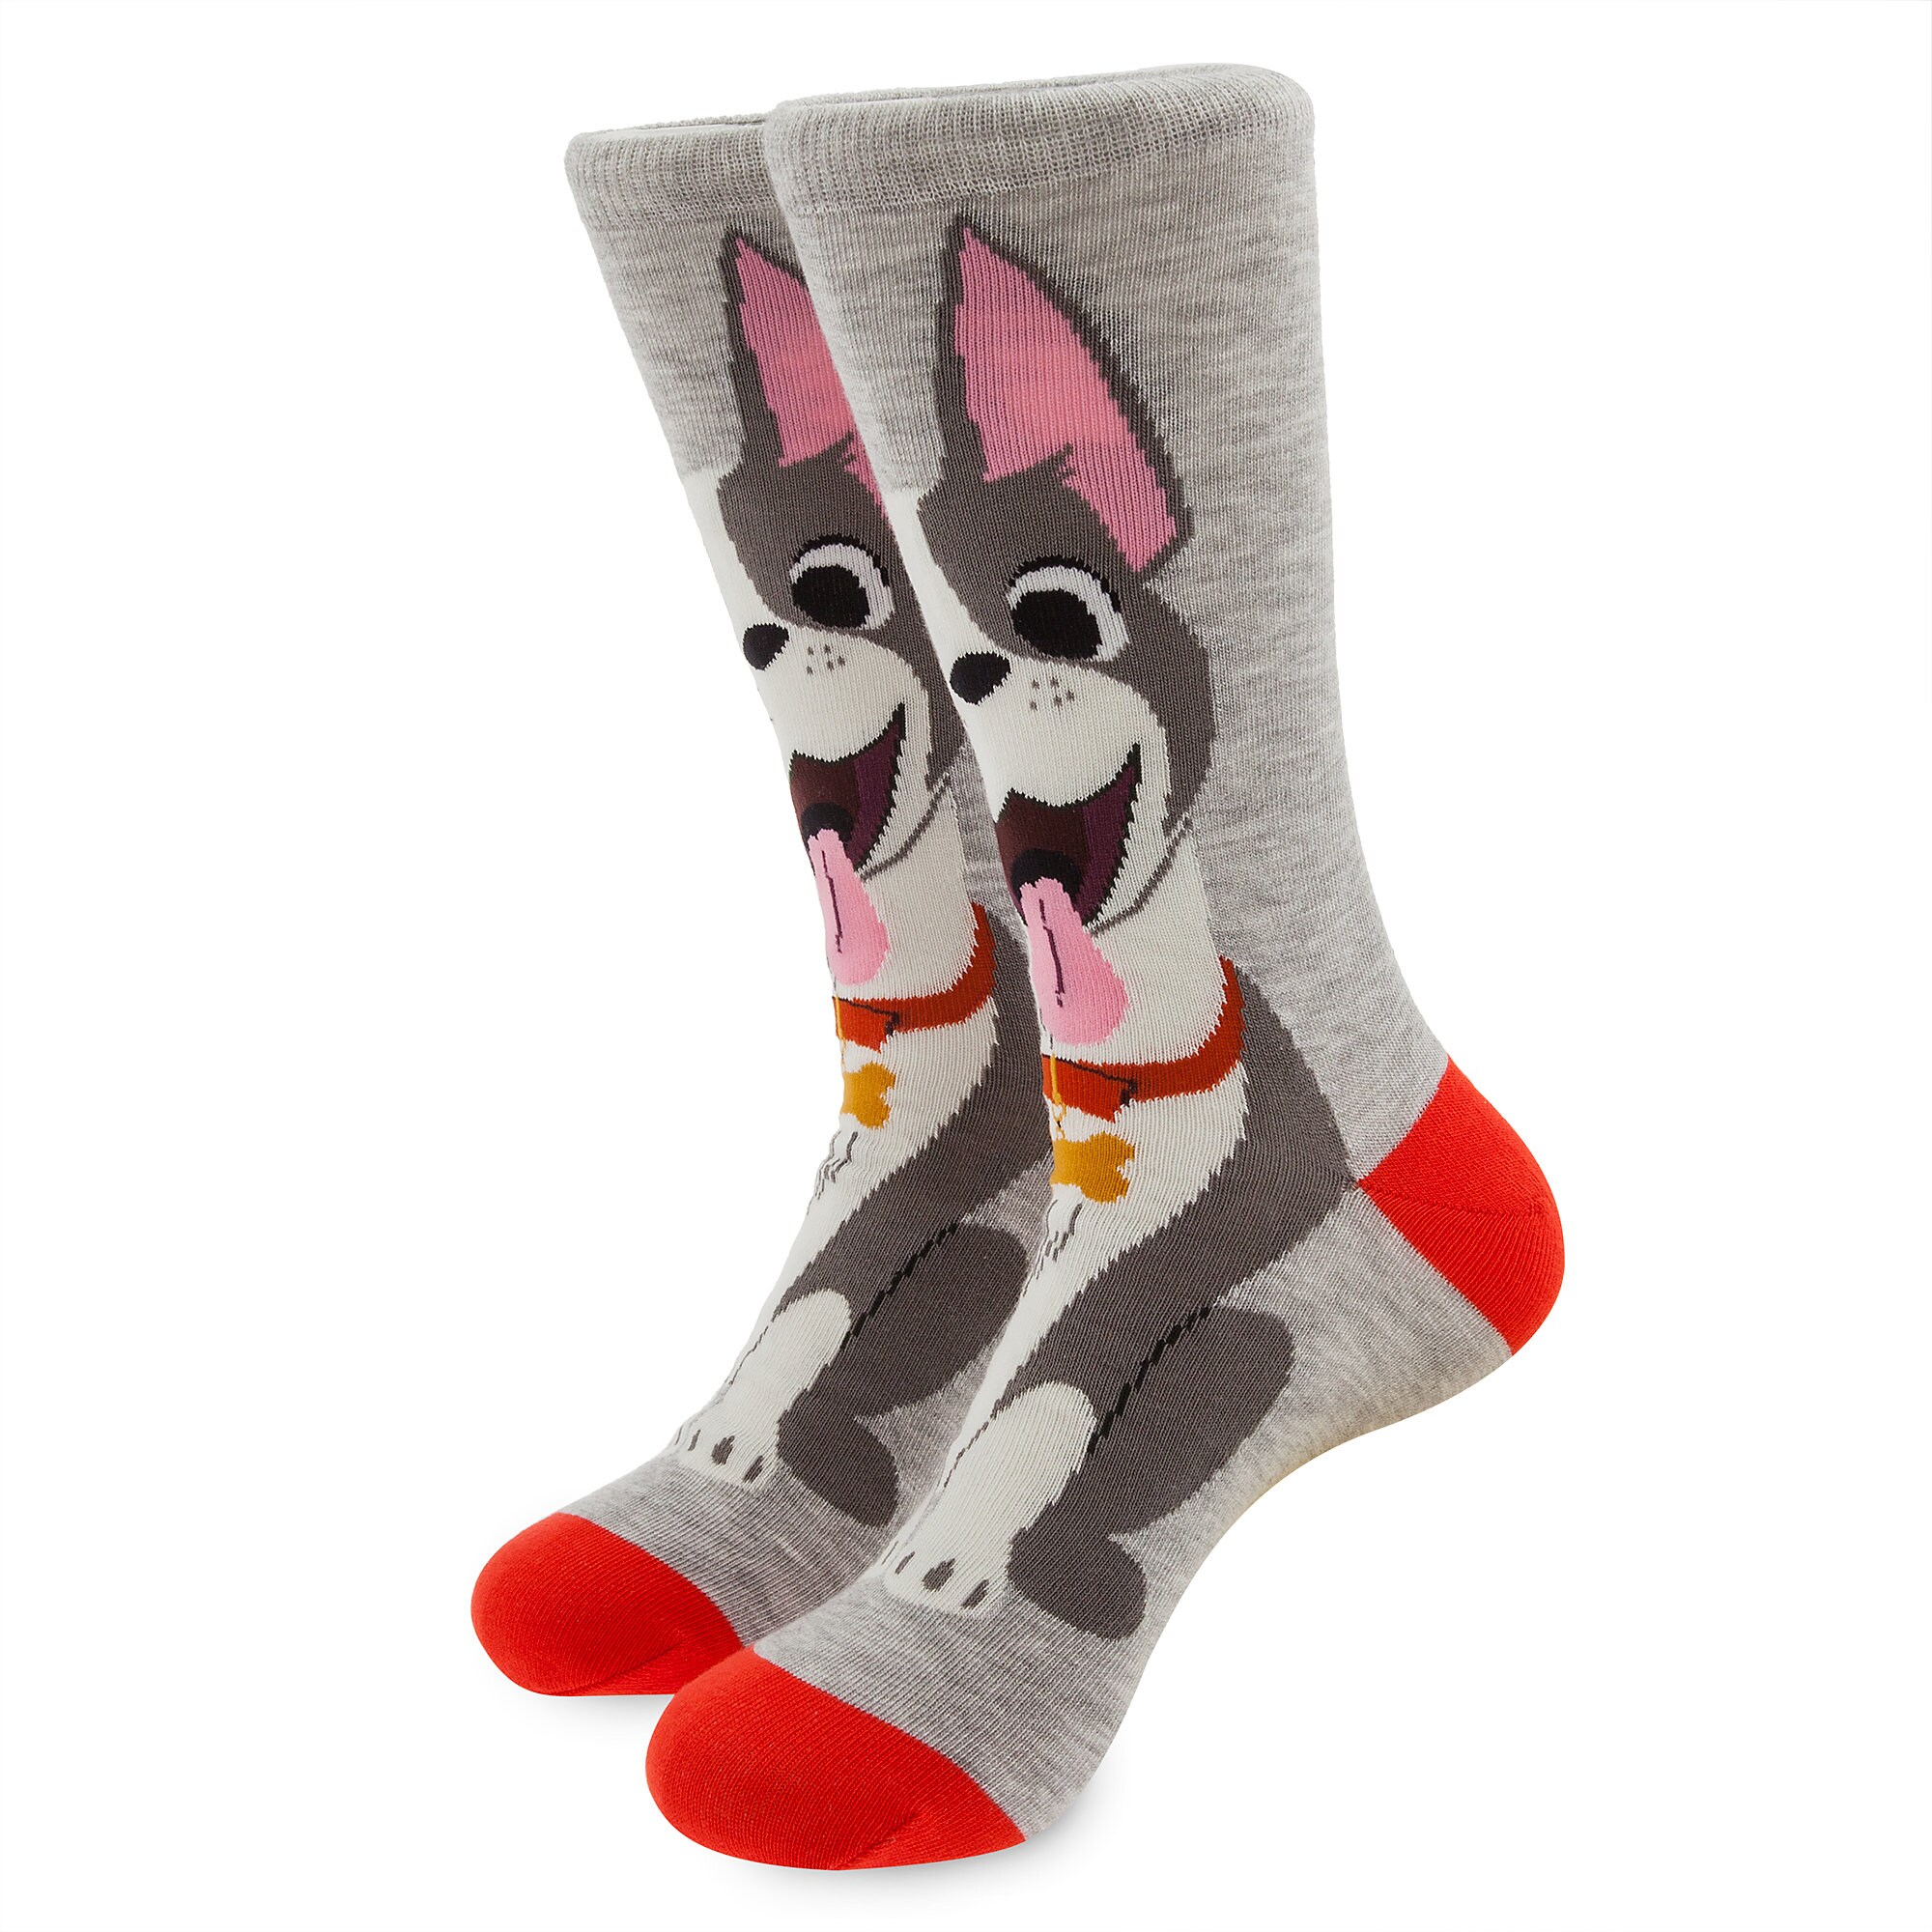 Disney Dogs Sock Set for Adults - Oh My Disney